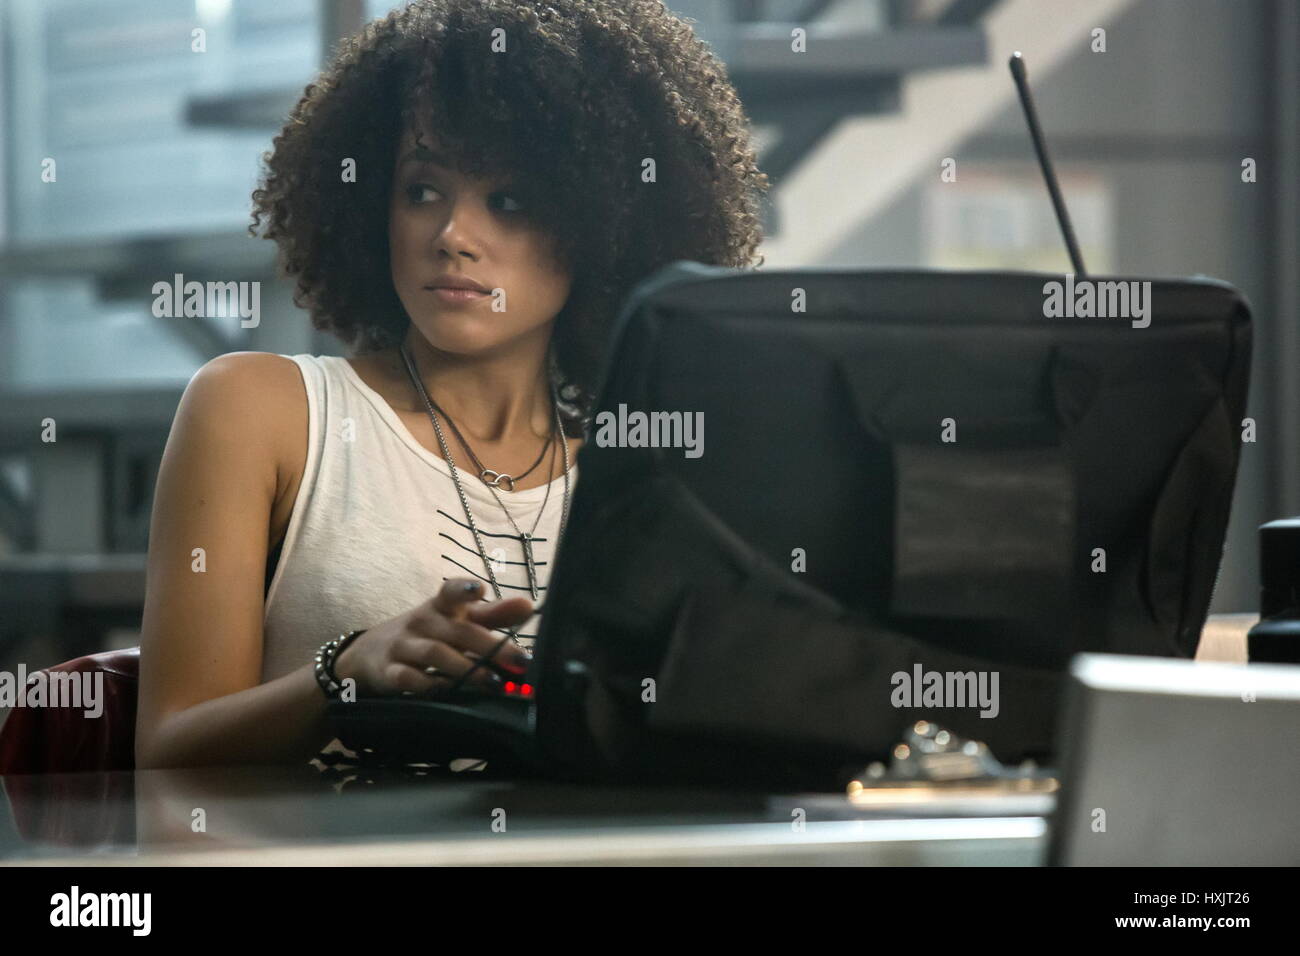 RELEASE DATE: April 14, 2017 TITLE: The Fate of the Furious STUDIO: Universal Pictures DIRECTOR: F. Gary Gray PLOT: When a mysterious woman seduces Dom into the world of crime and a betrayal of those closest to him, the crew face trials that will test them as never before PICTURED: Nathalie Emmanuel as Ramsey. (Credit Image: © Universal Pictures/Entertainment Pictures) Stock Photo